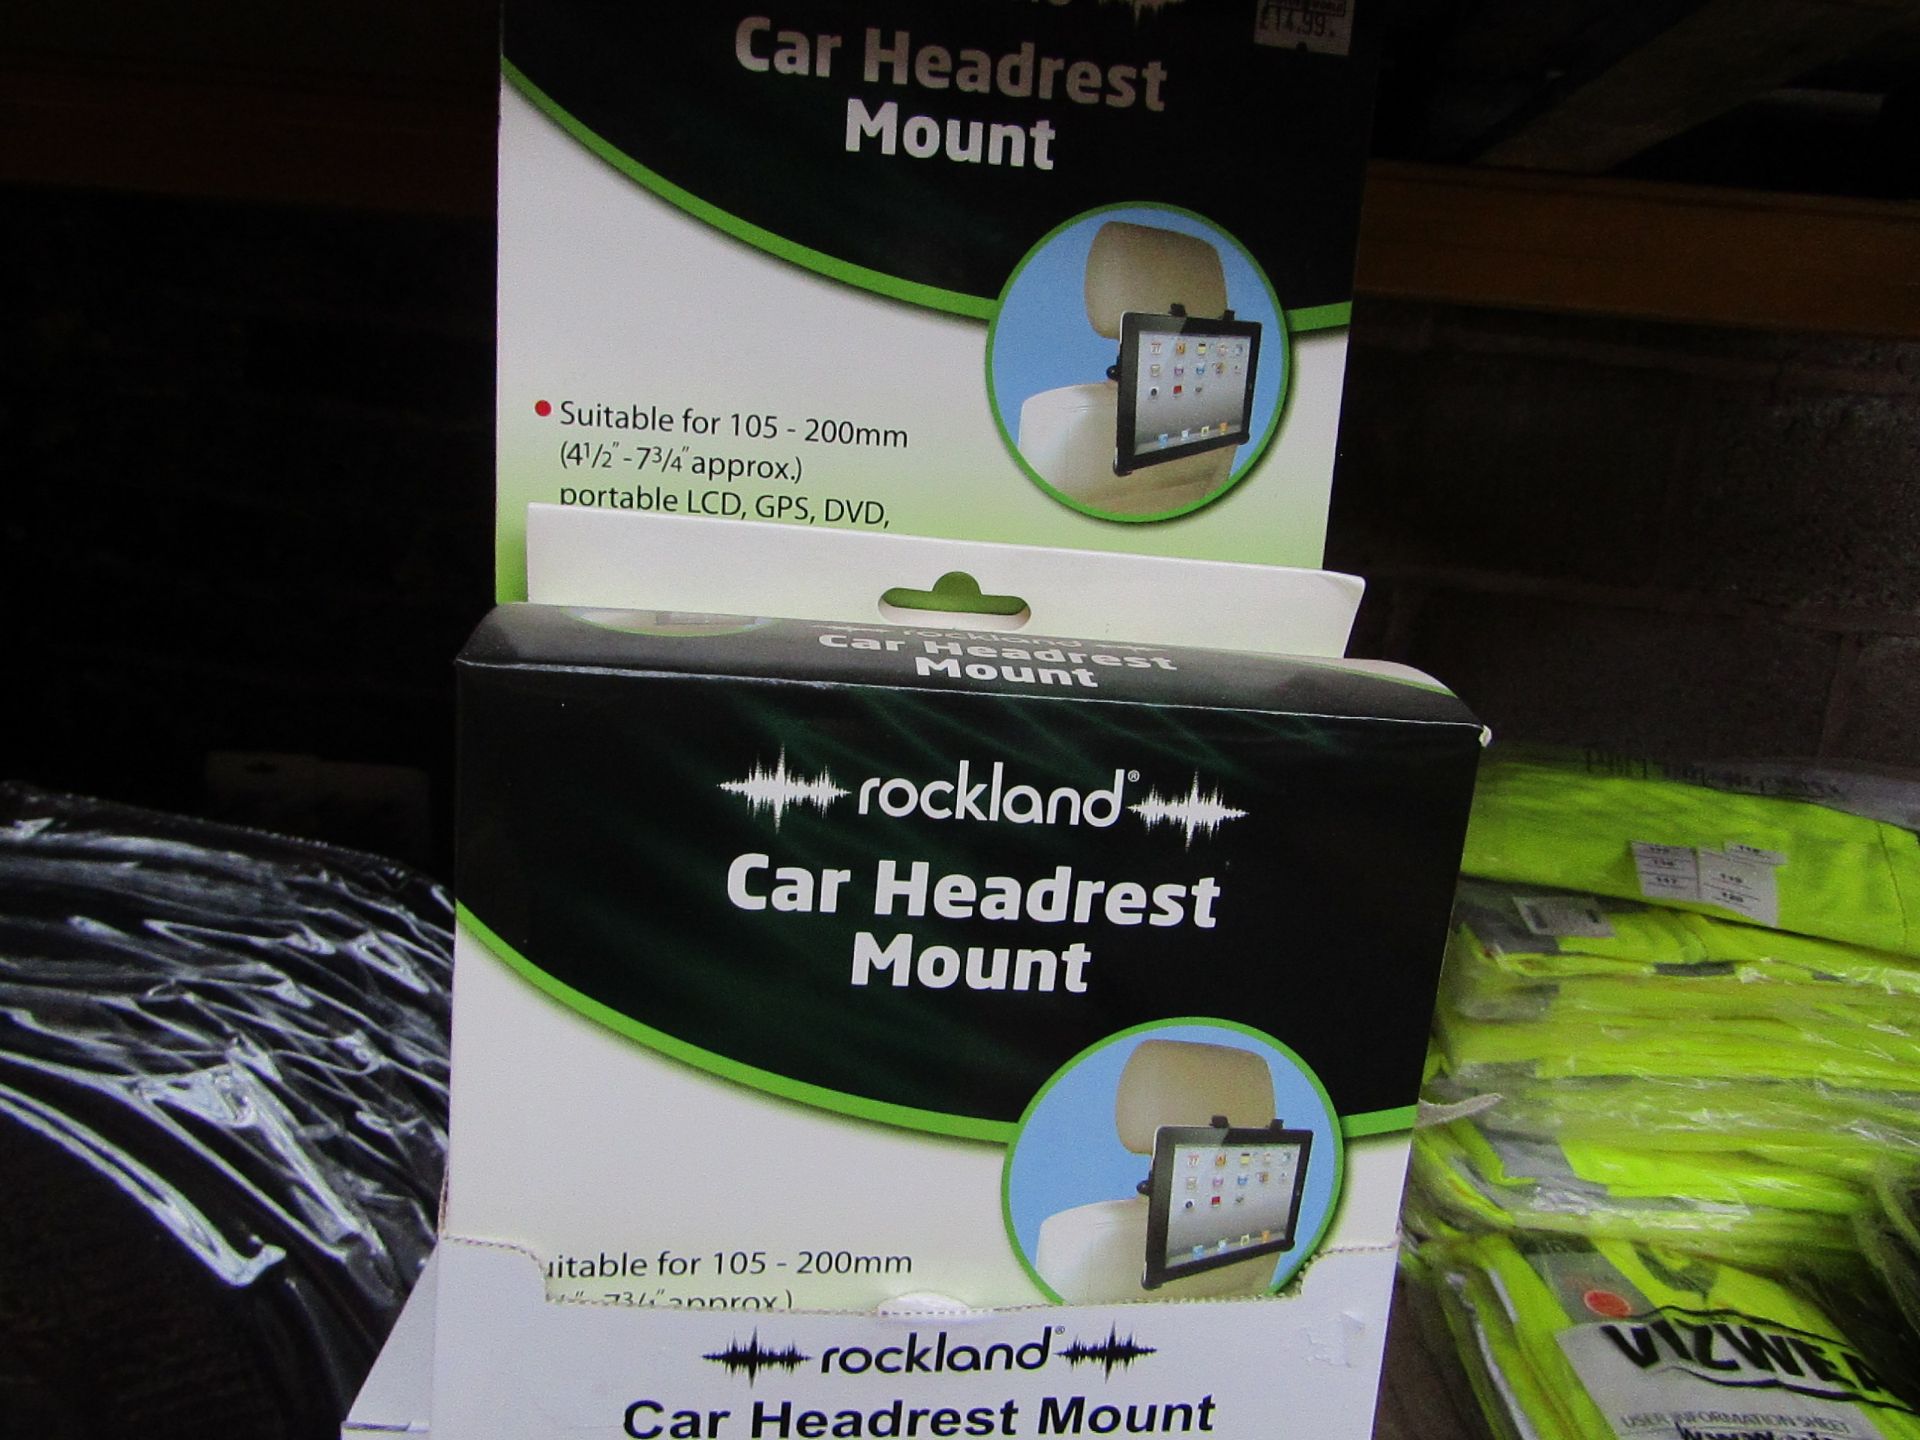 4x Rockland Car Head rest mounts suitable for Tablets and devices up to 7" - New.